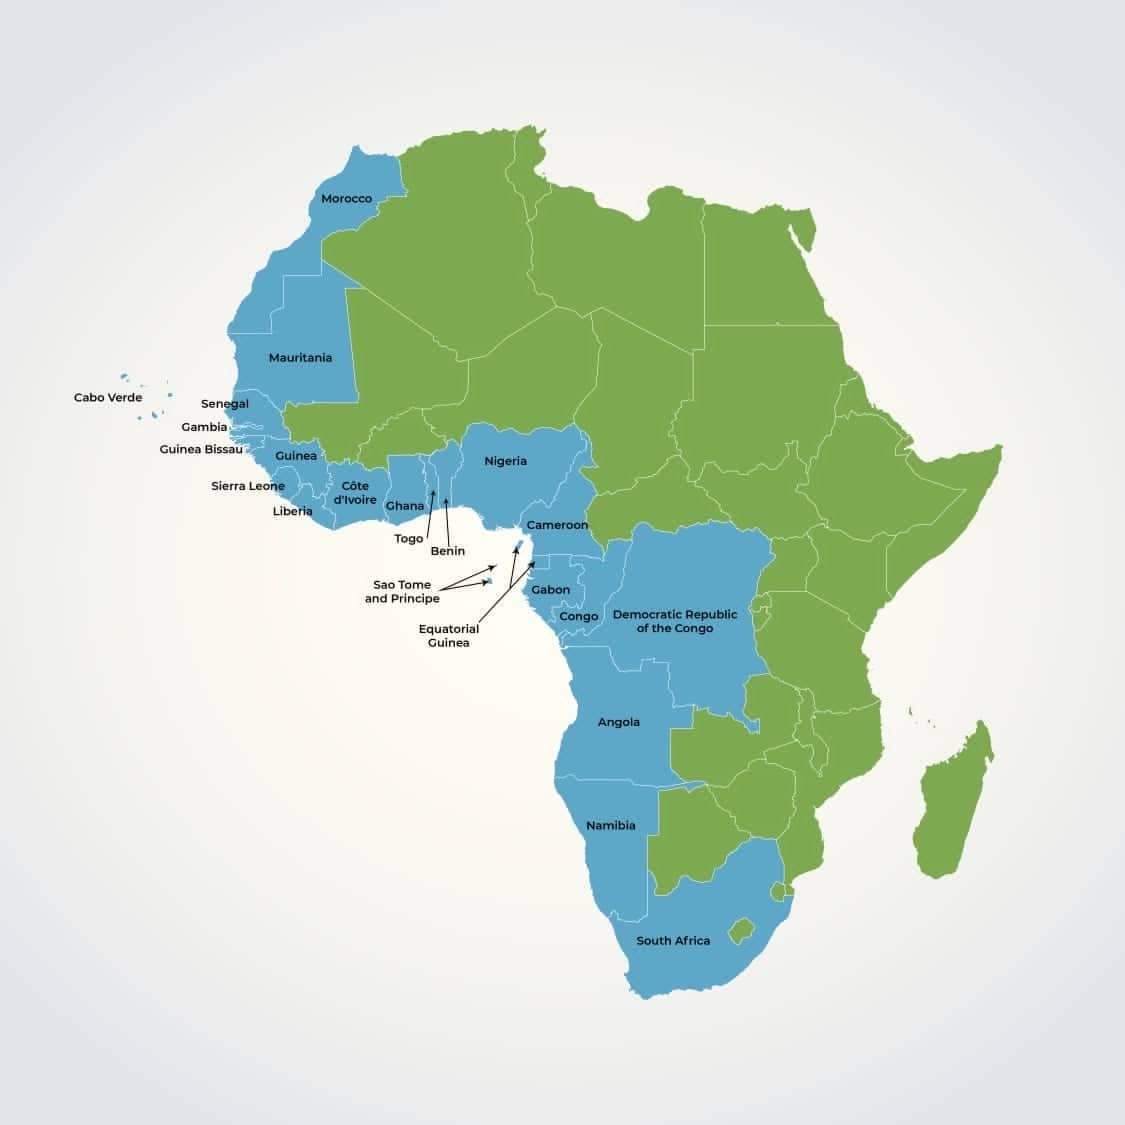 The Atlantic coast of Africa; opportunities and hope